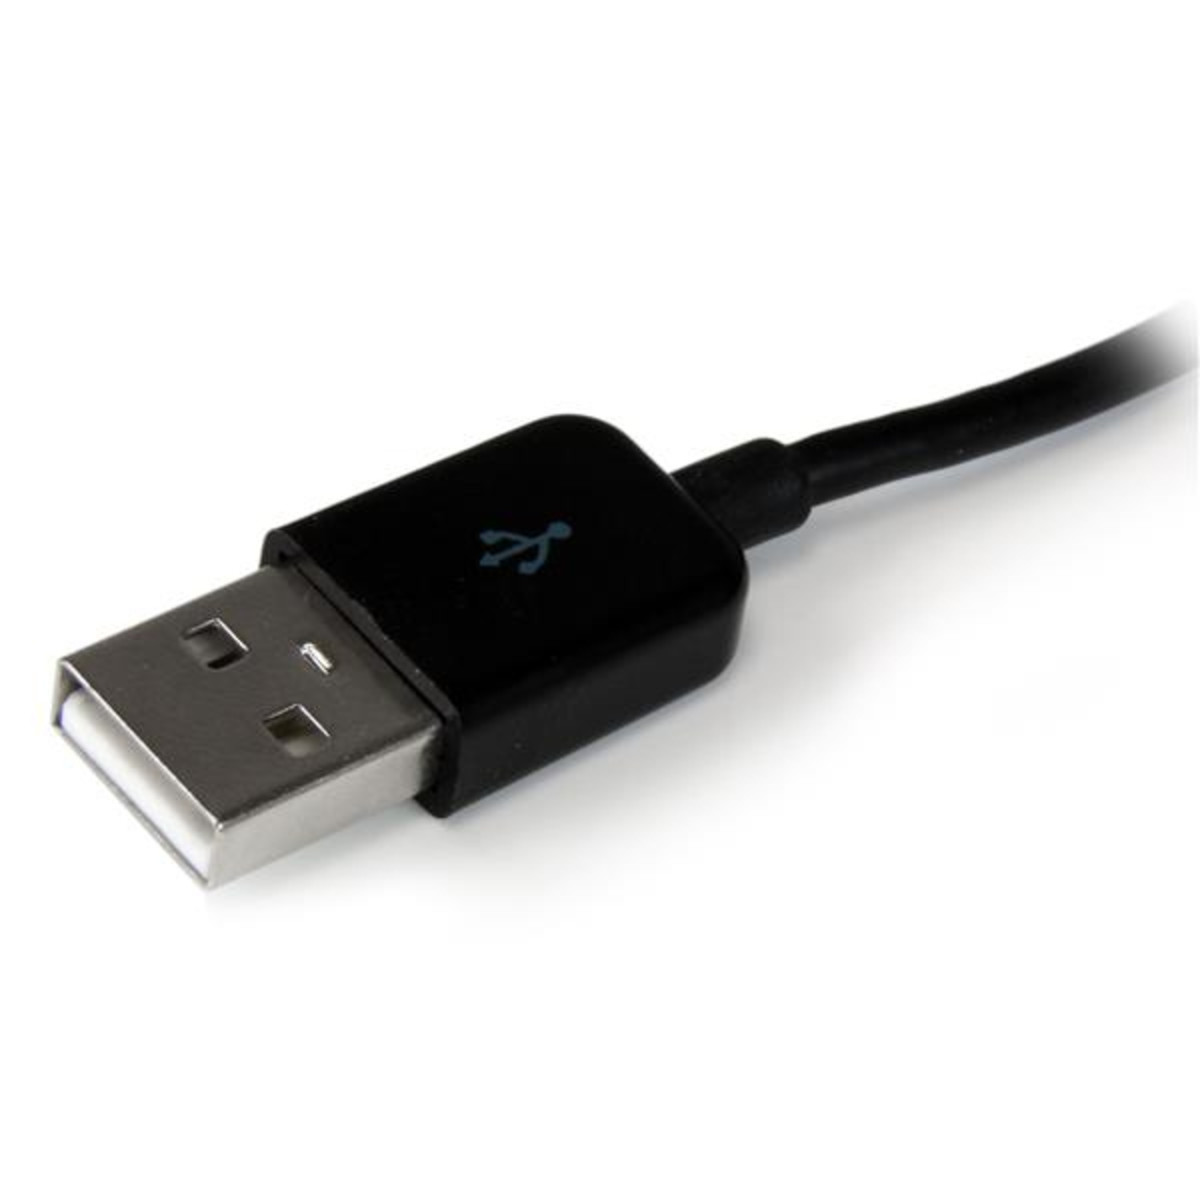 VGA-HDMI Adapter with USB Audio & Power